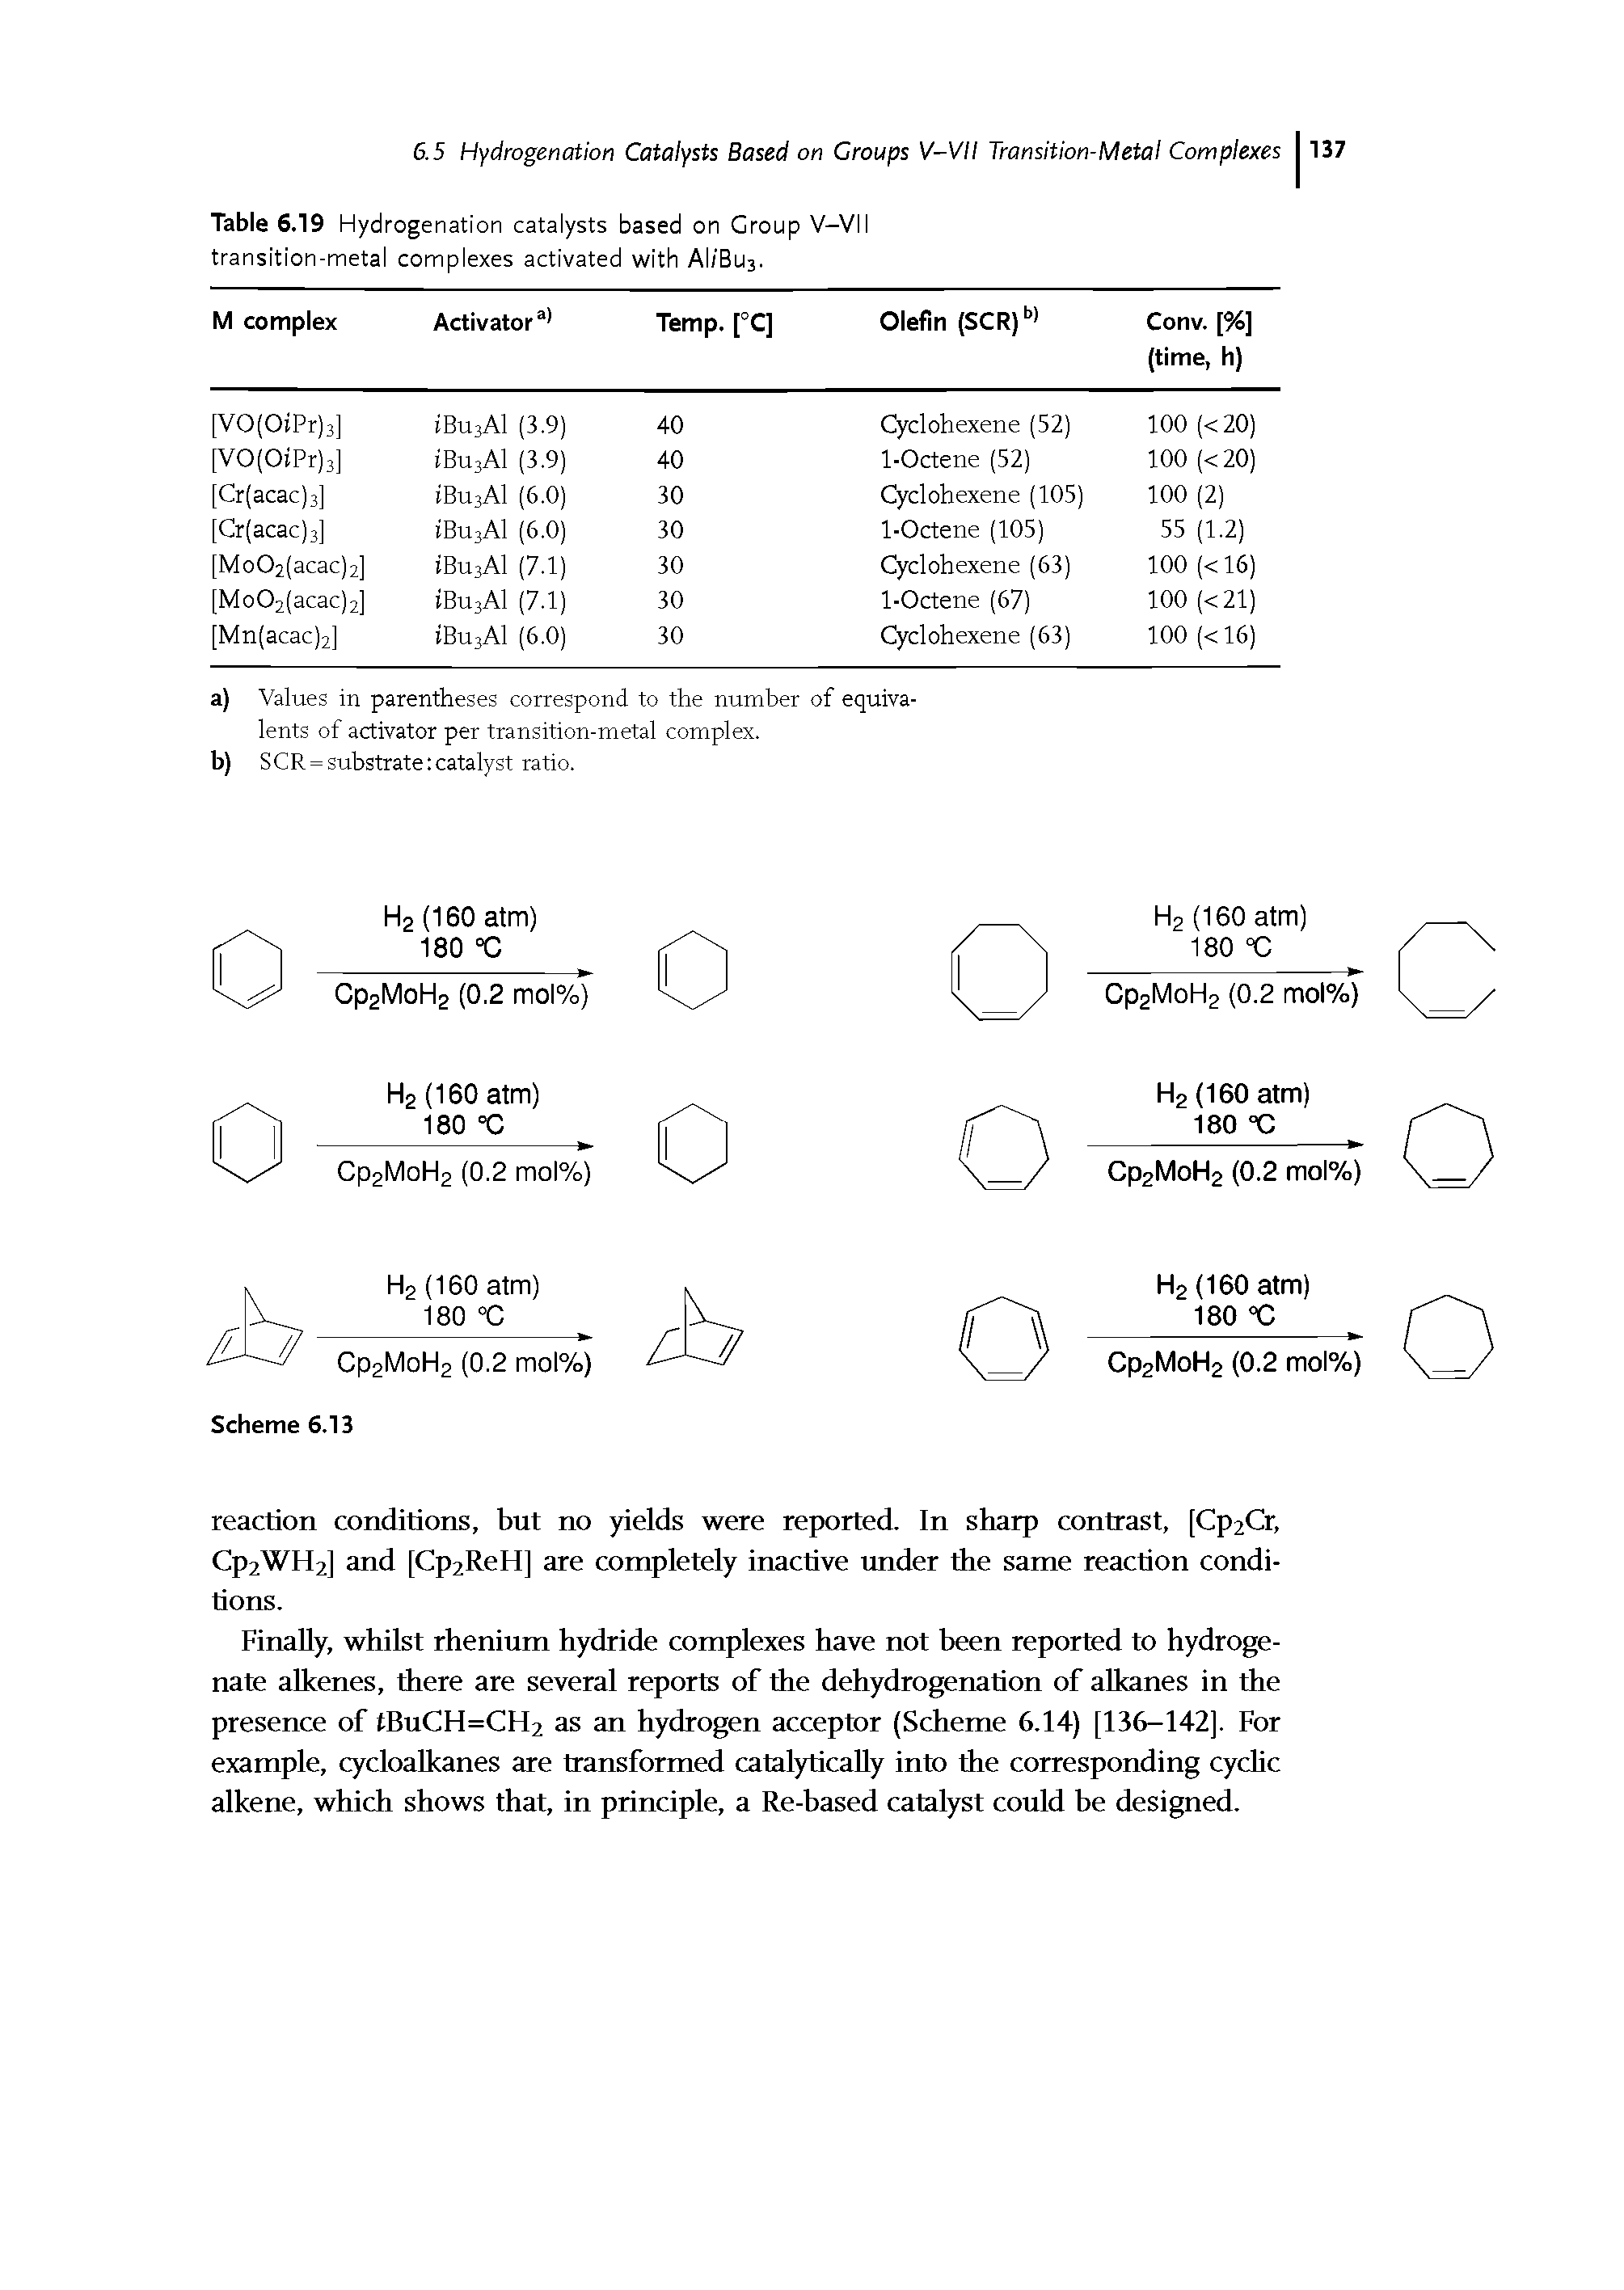 Table 6.19 Hydrogenation catalysts based on Group V-VII transition-metal complexes activated with AI / B u 3.